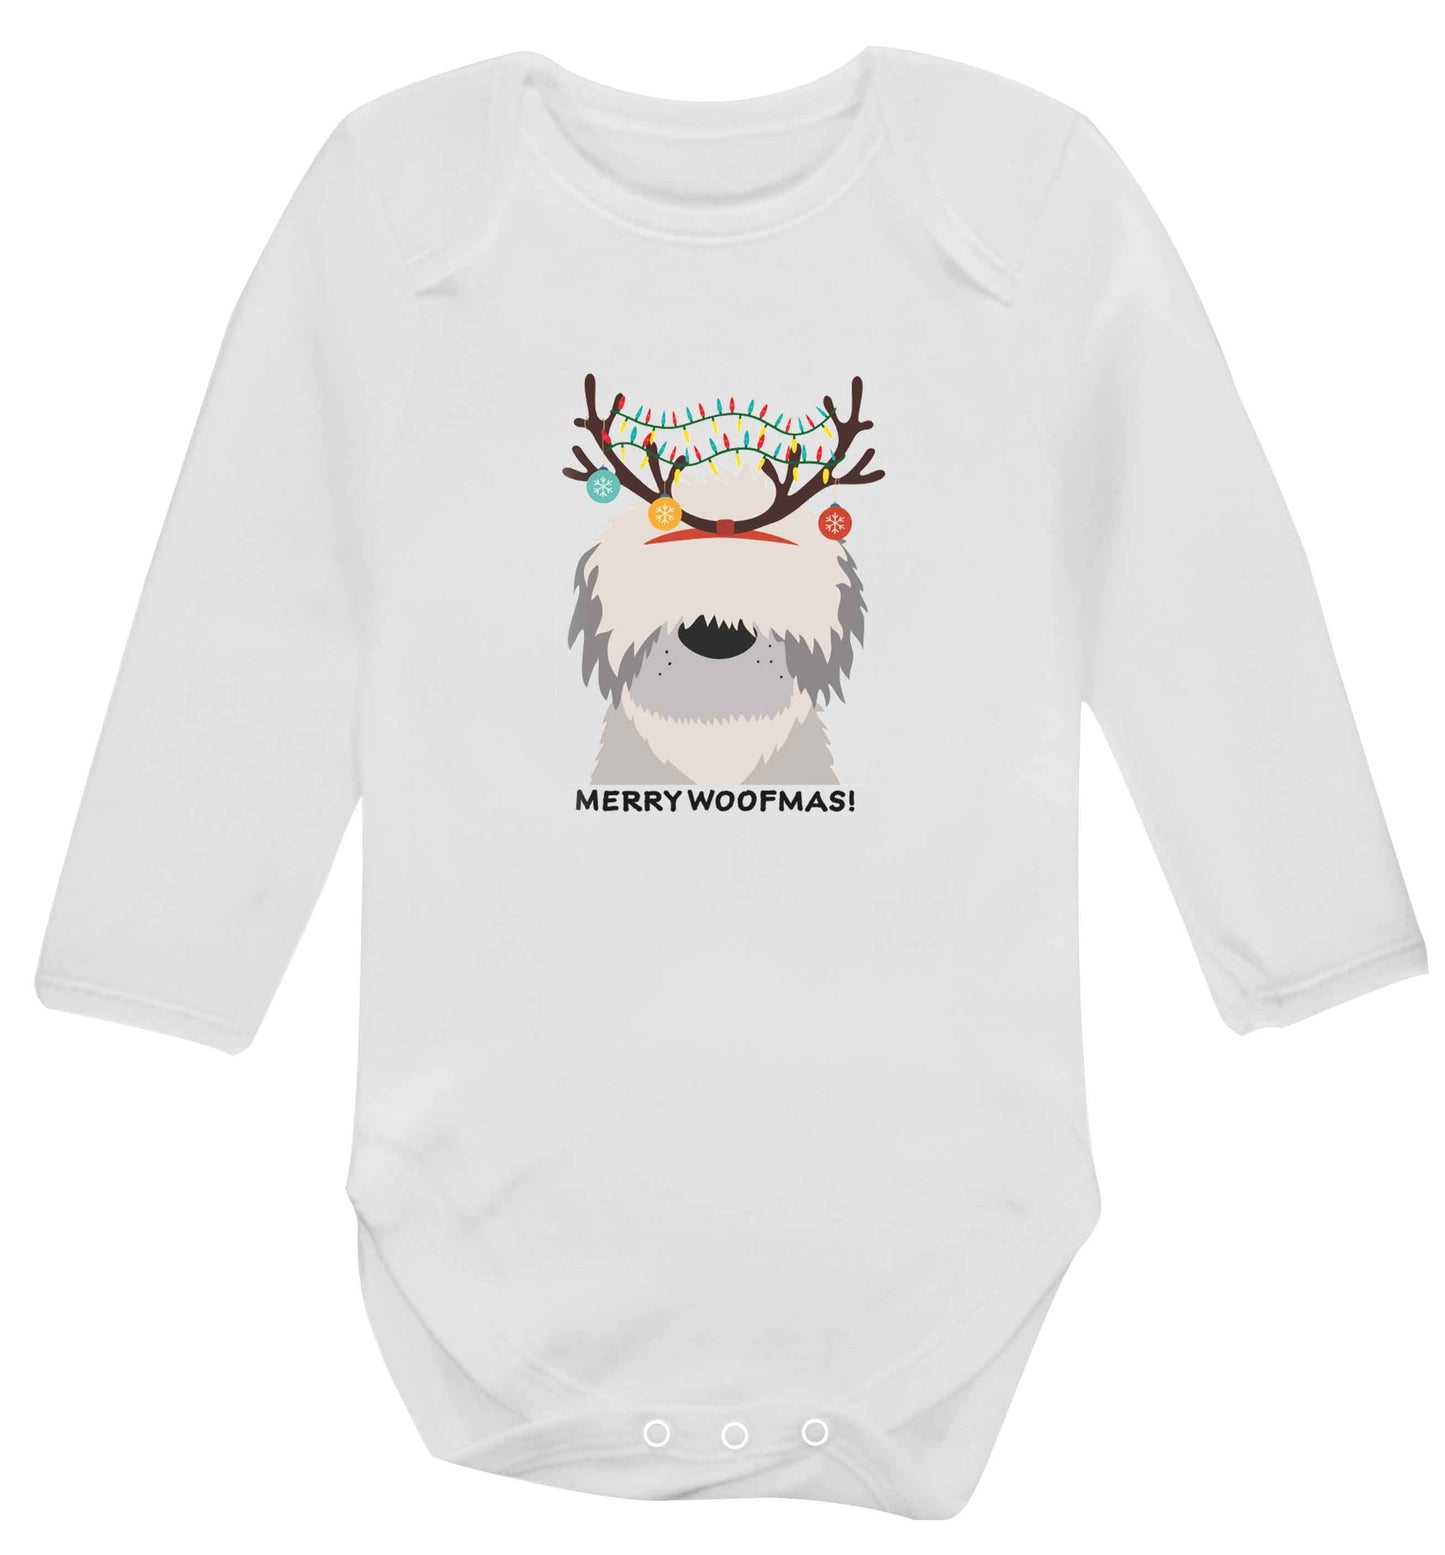 Merry Woofmas! baby vest long sleeved white 6-12 months